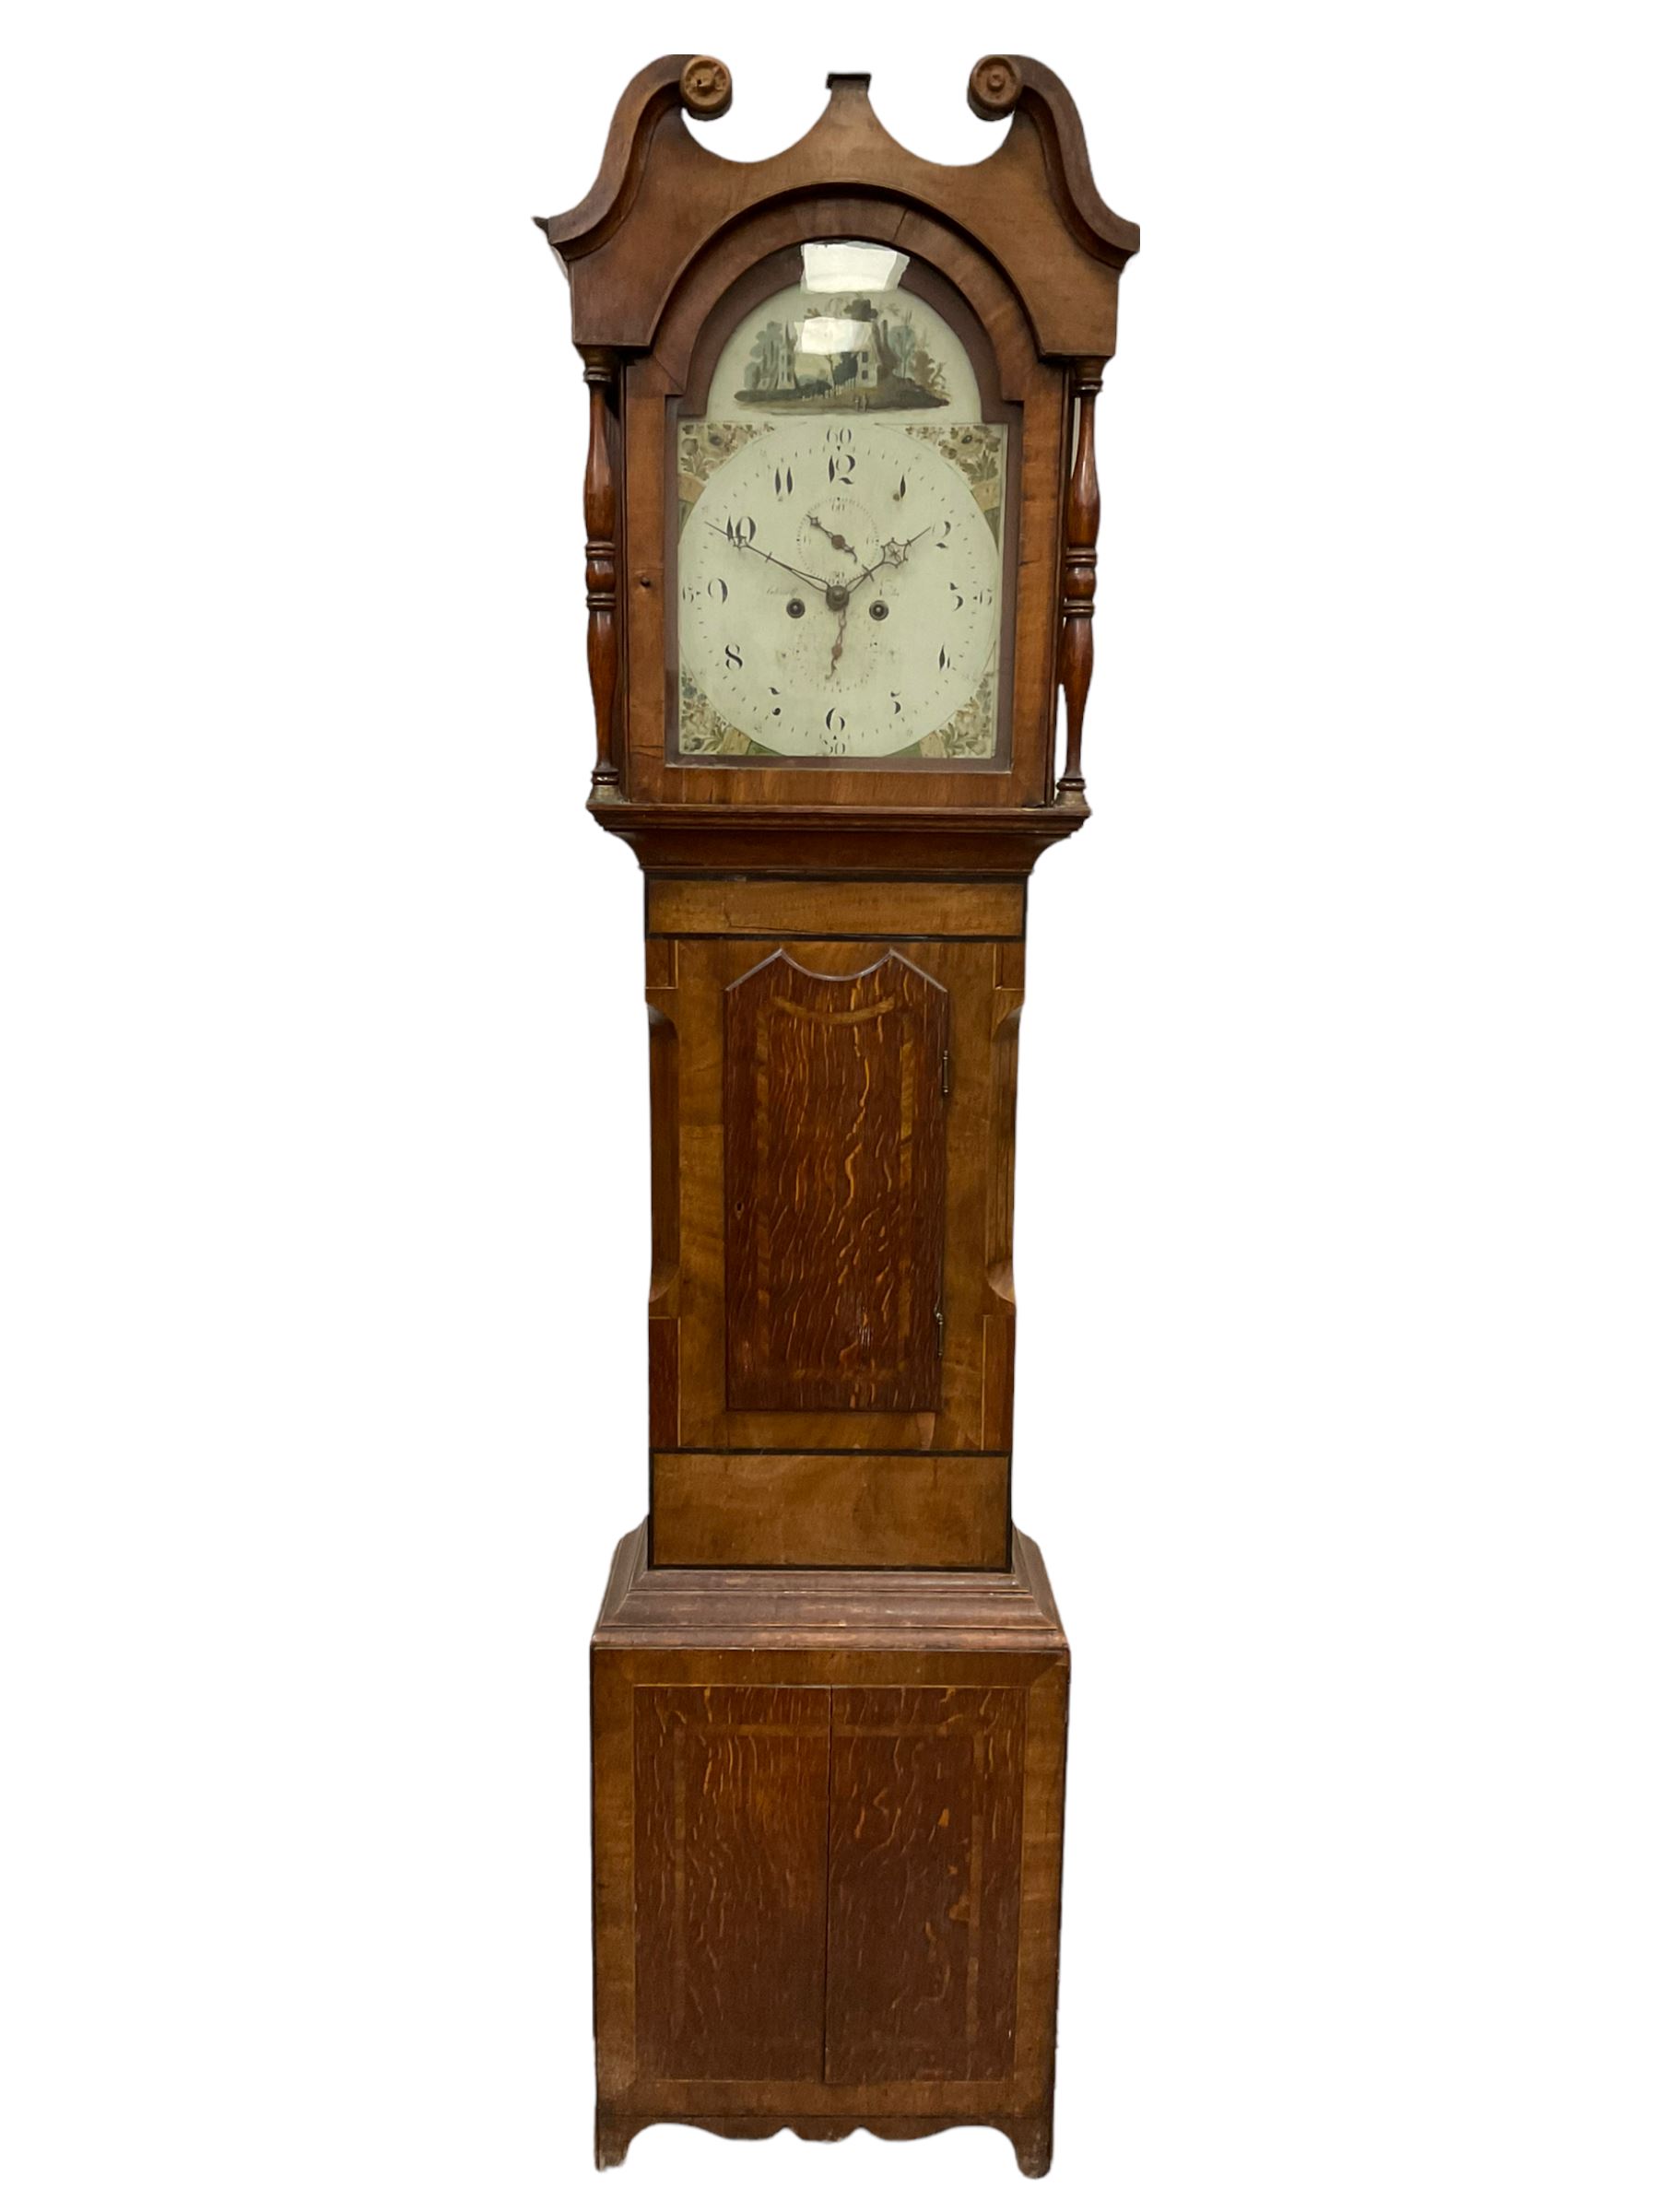 An Oak and Mahogany longcase clock with a Swans neck pediment and break arch hood door flanked by tw